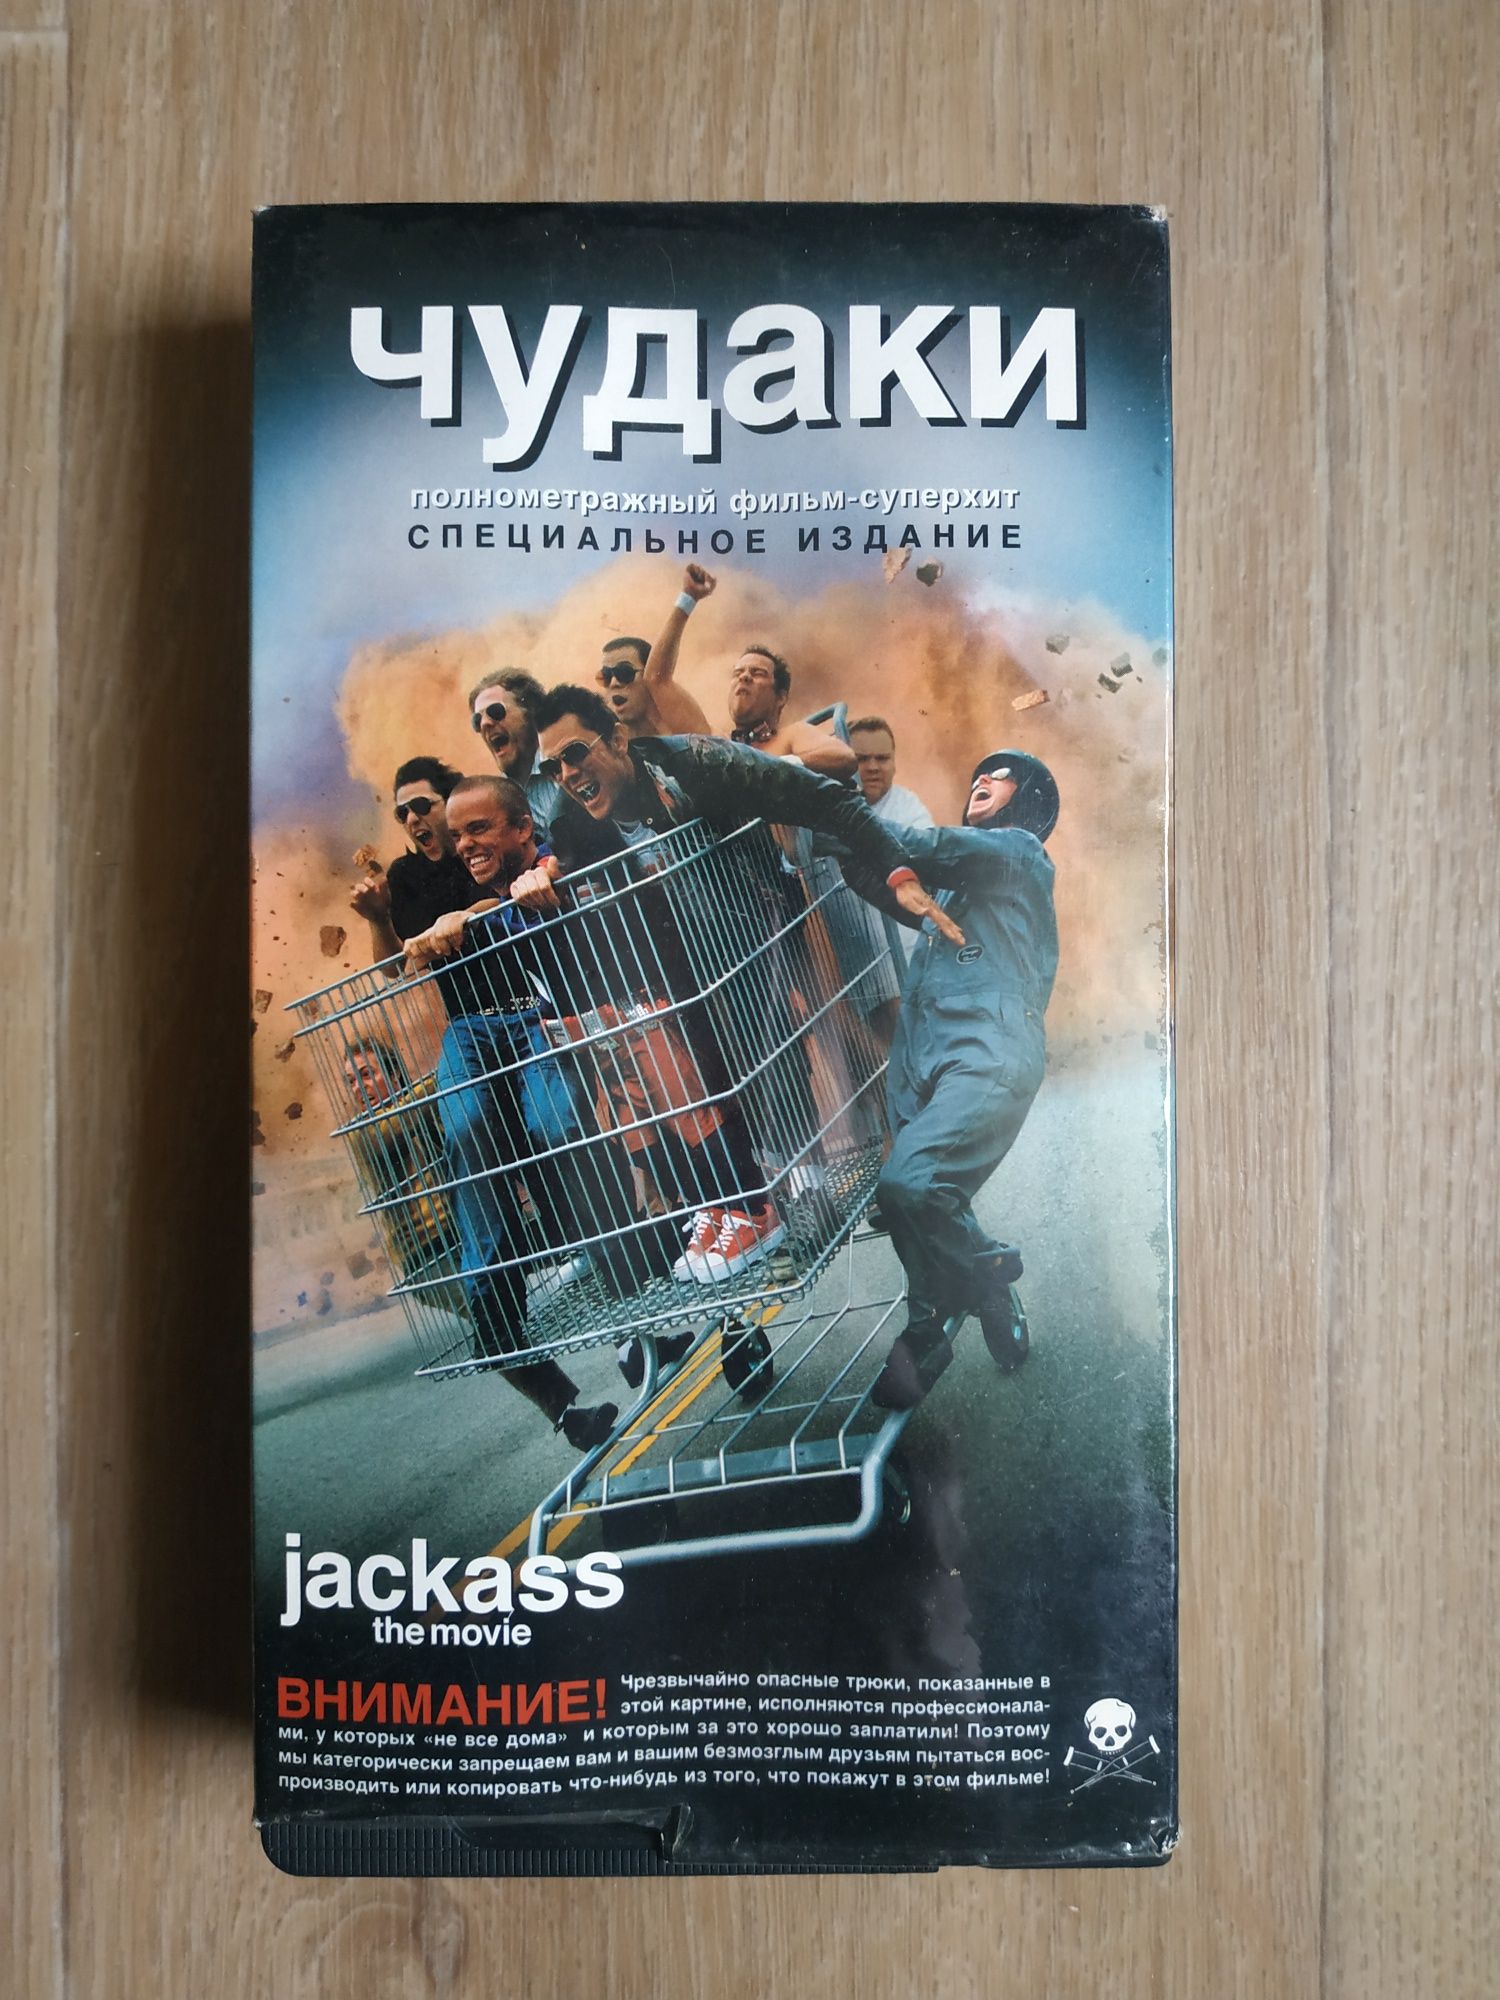 VHS Jackass the movie Чудаки